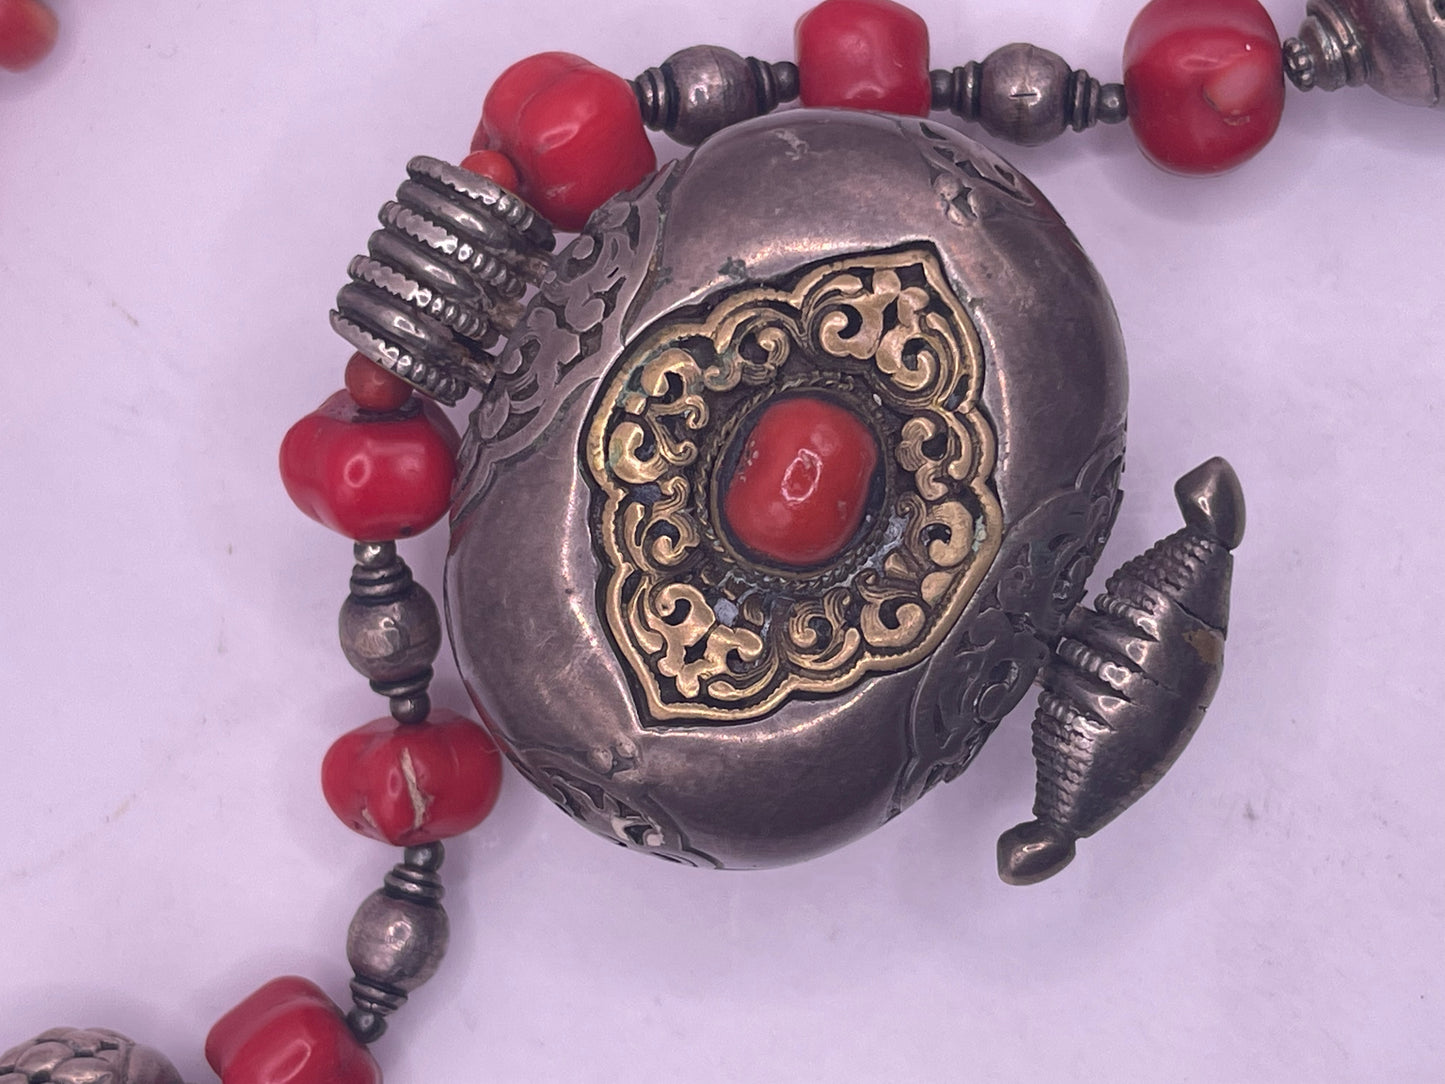 Antique Tibetan coral ghau pendant with a coral and silver necklace